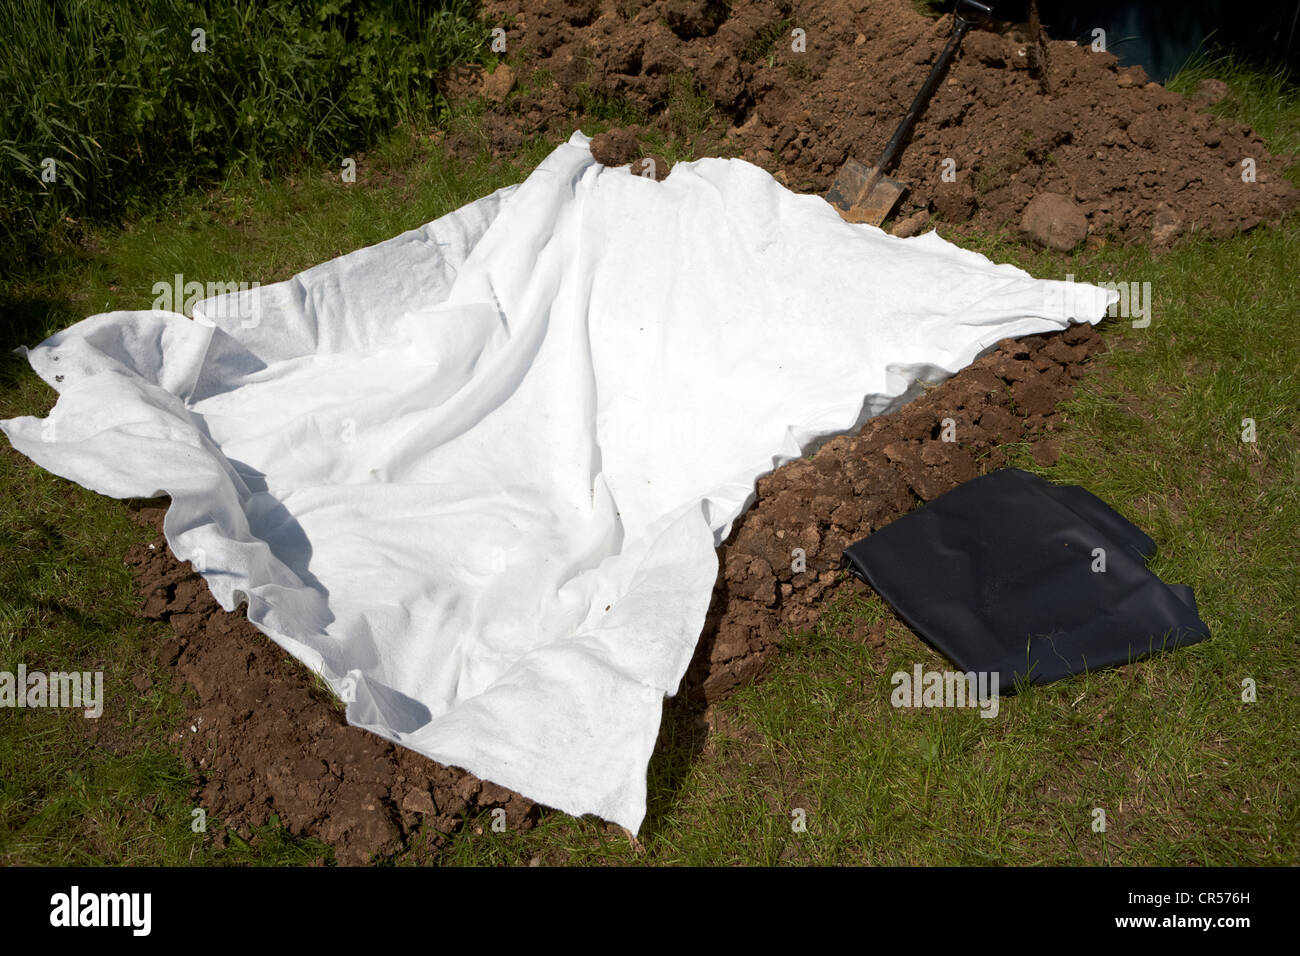 fleece lining a hole dug to build a pond in a garden in the uk w Stock Photo